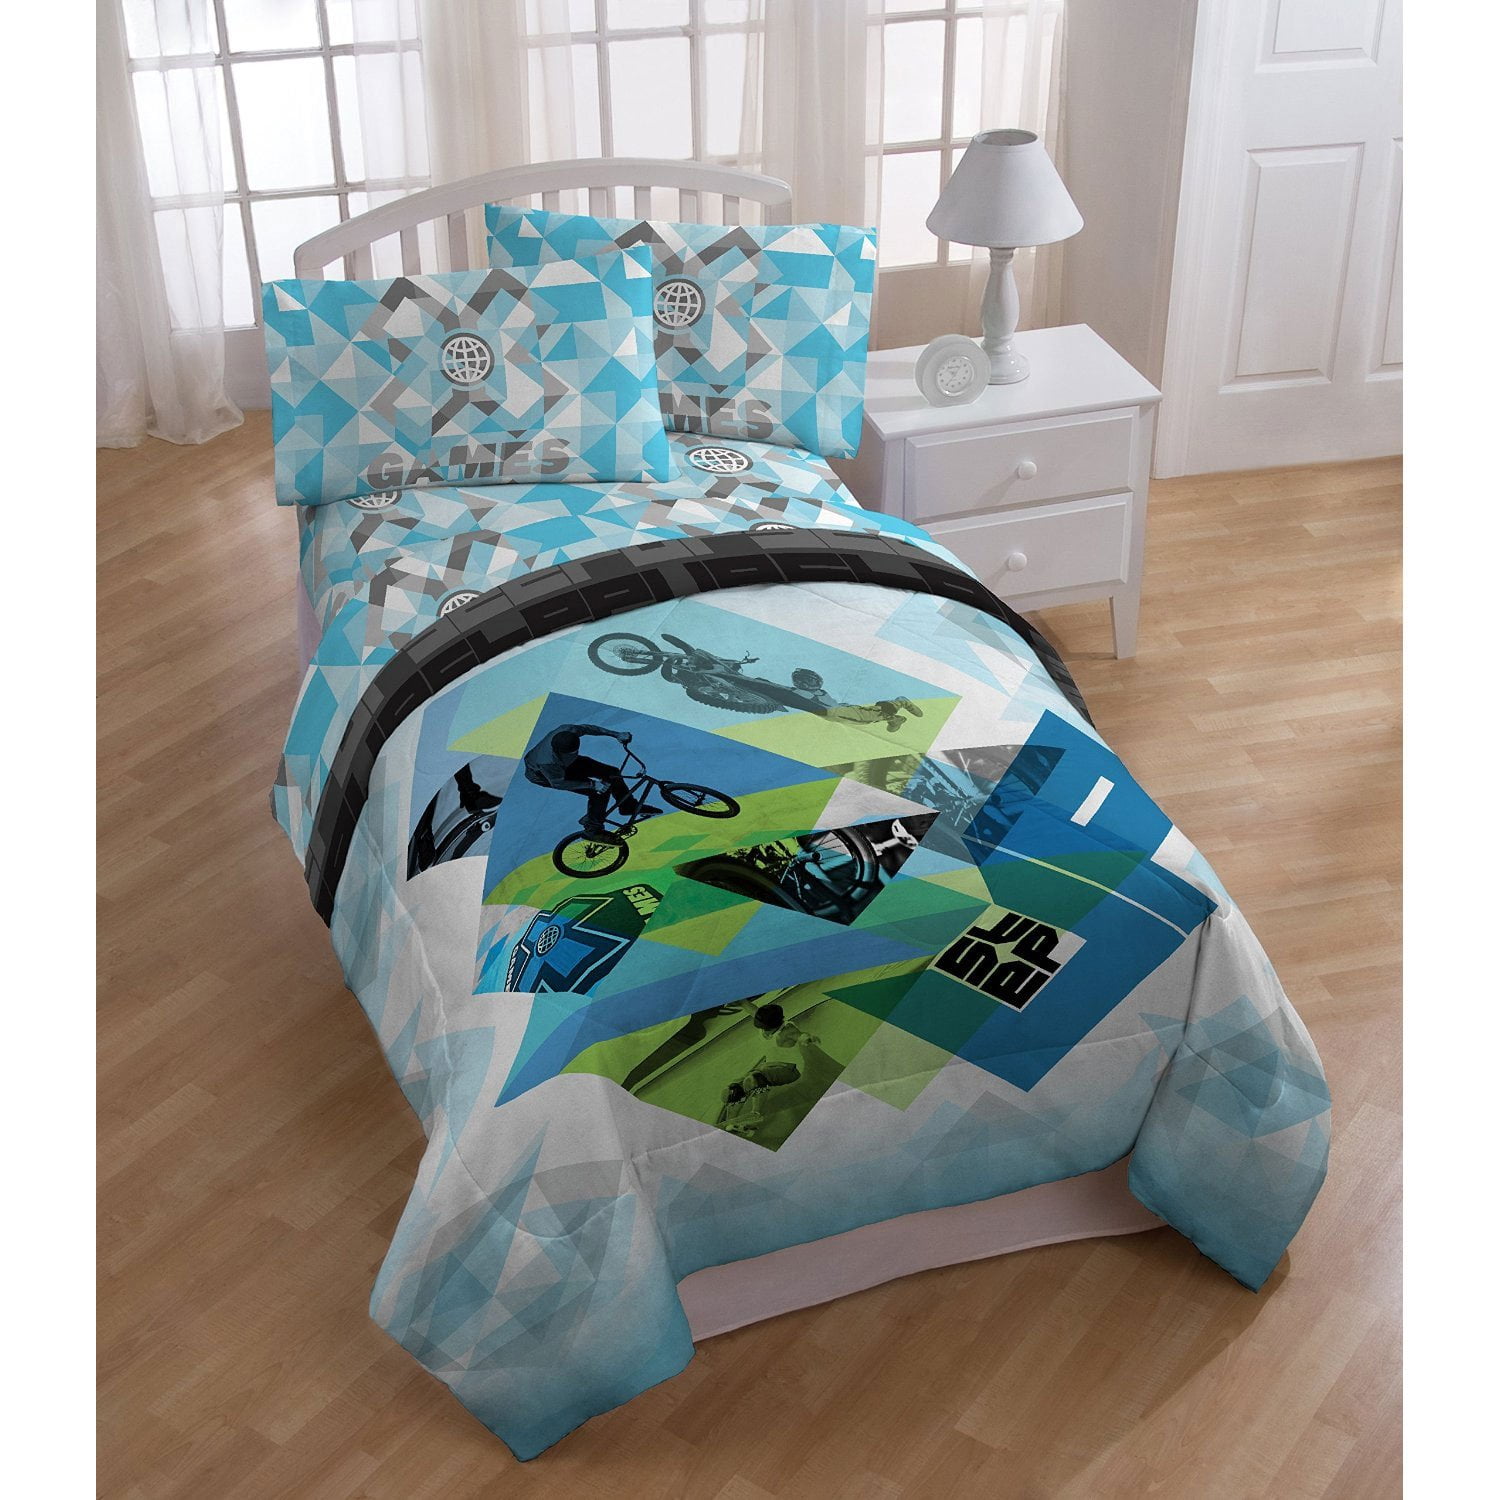 nEw X GAMES BED SHEET SET ESPN Extreme Sports BMX Bicycle Bedding Accessories 